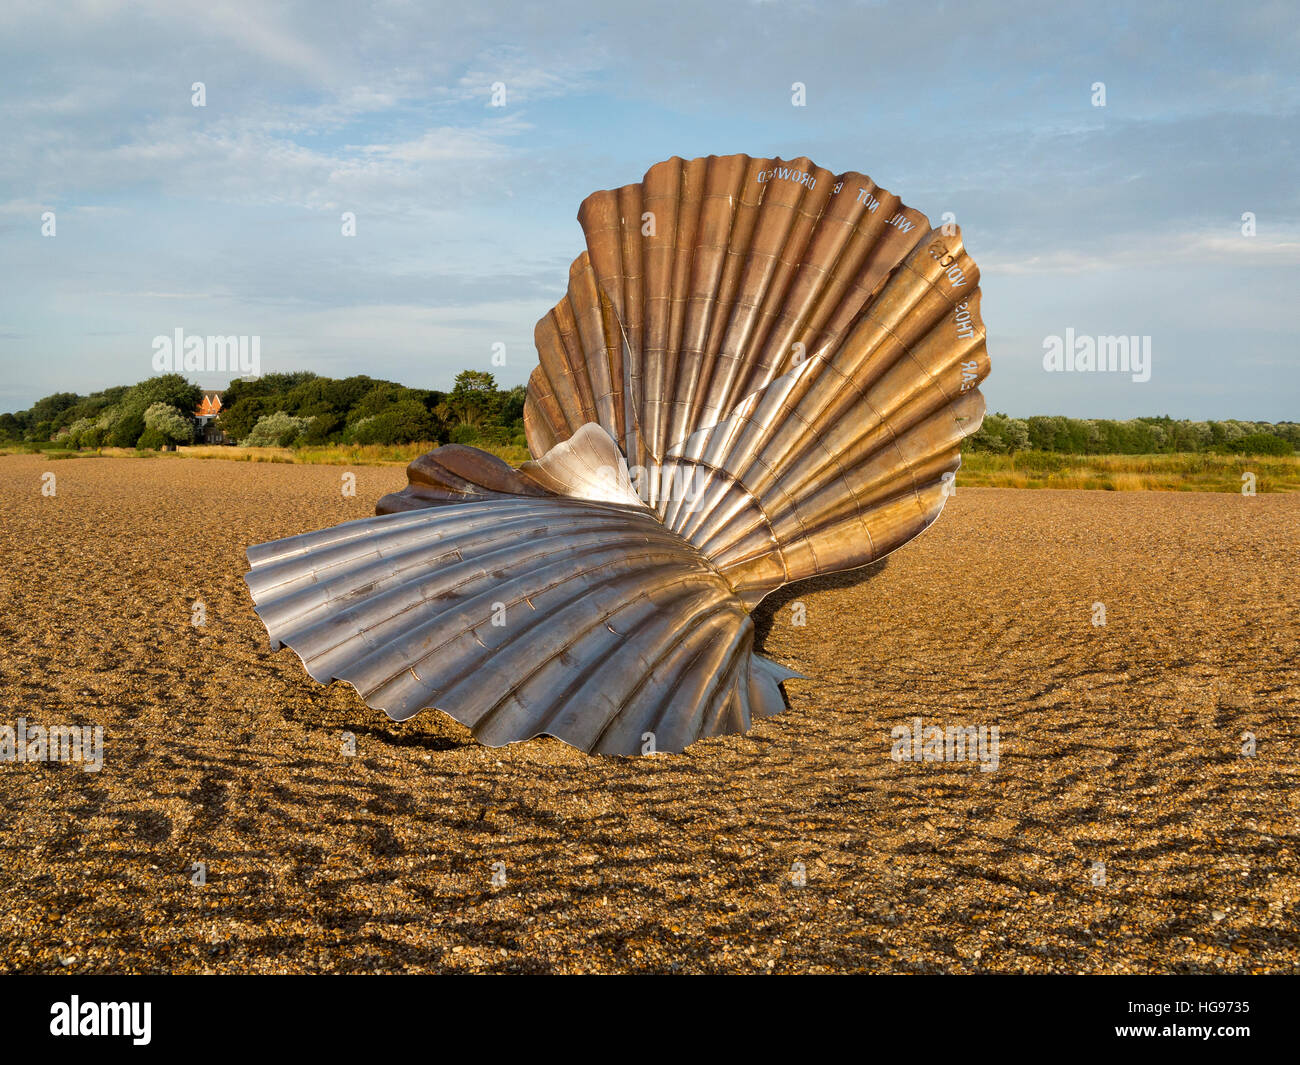 'The Scallop' sculpture by Maggi Hambling on the shingle beach at Aldeburgh Suffolk England against a blue sky and trees Stock Photo